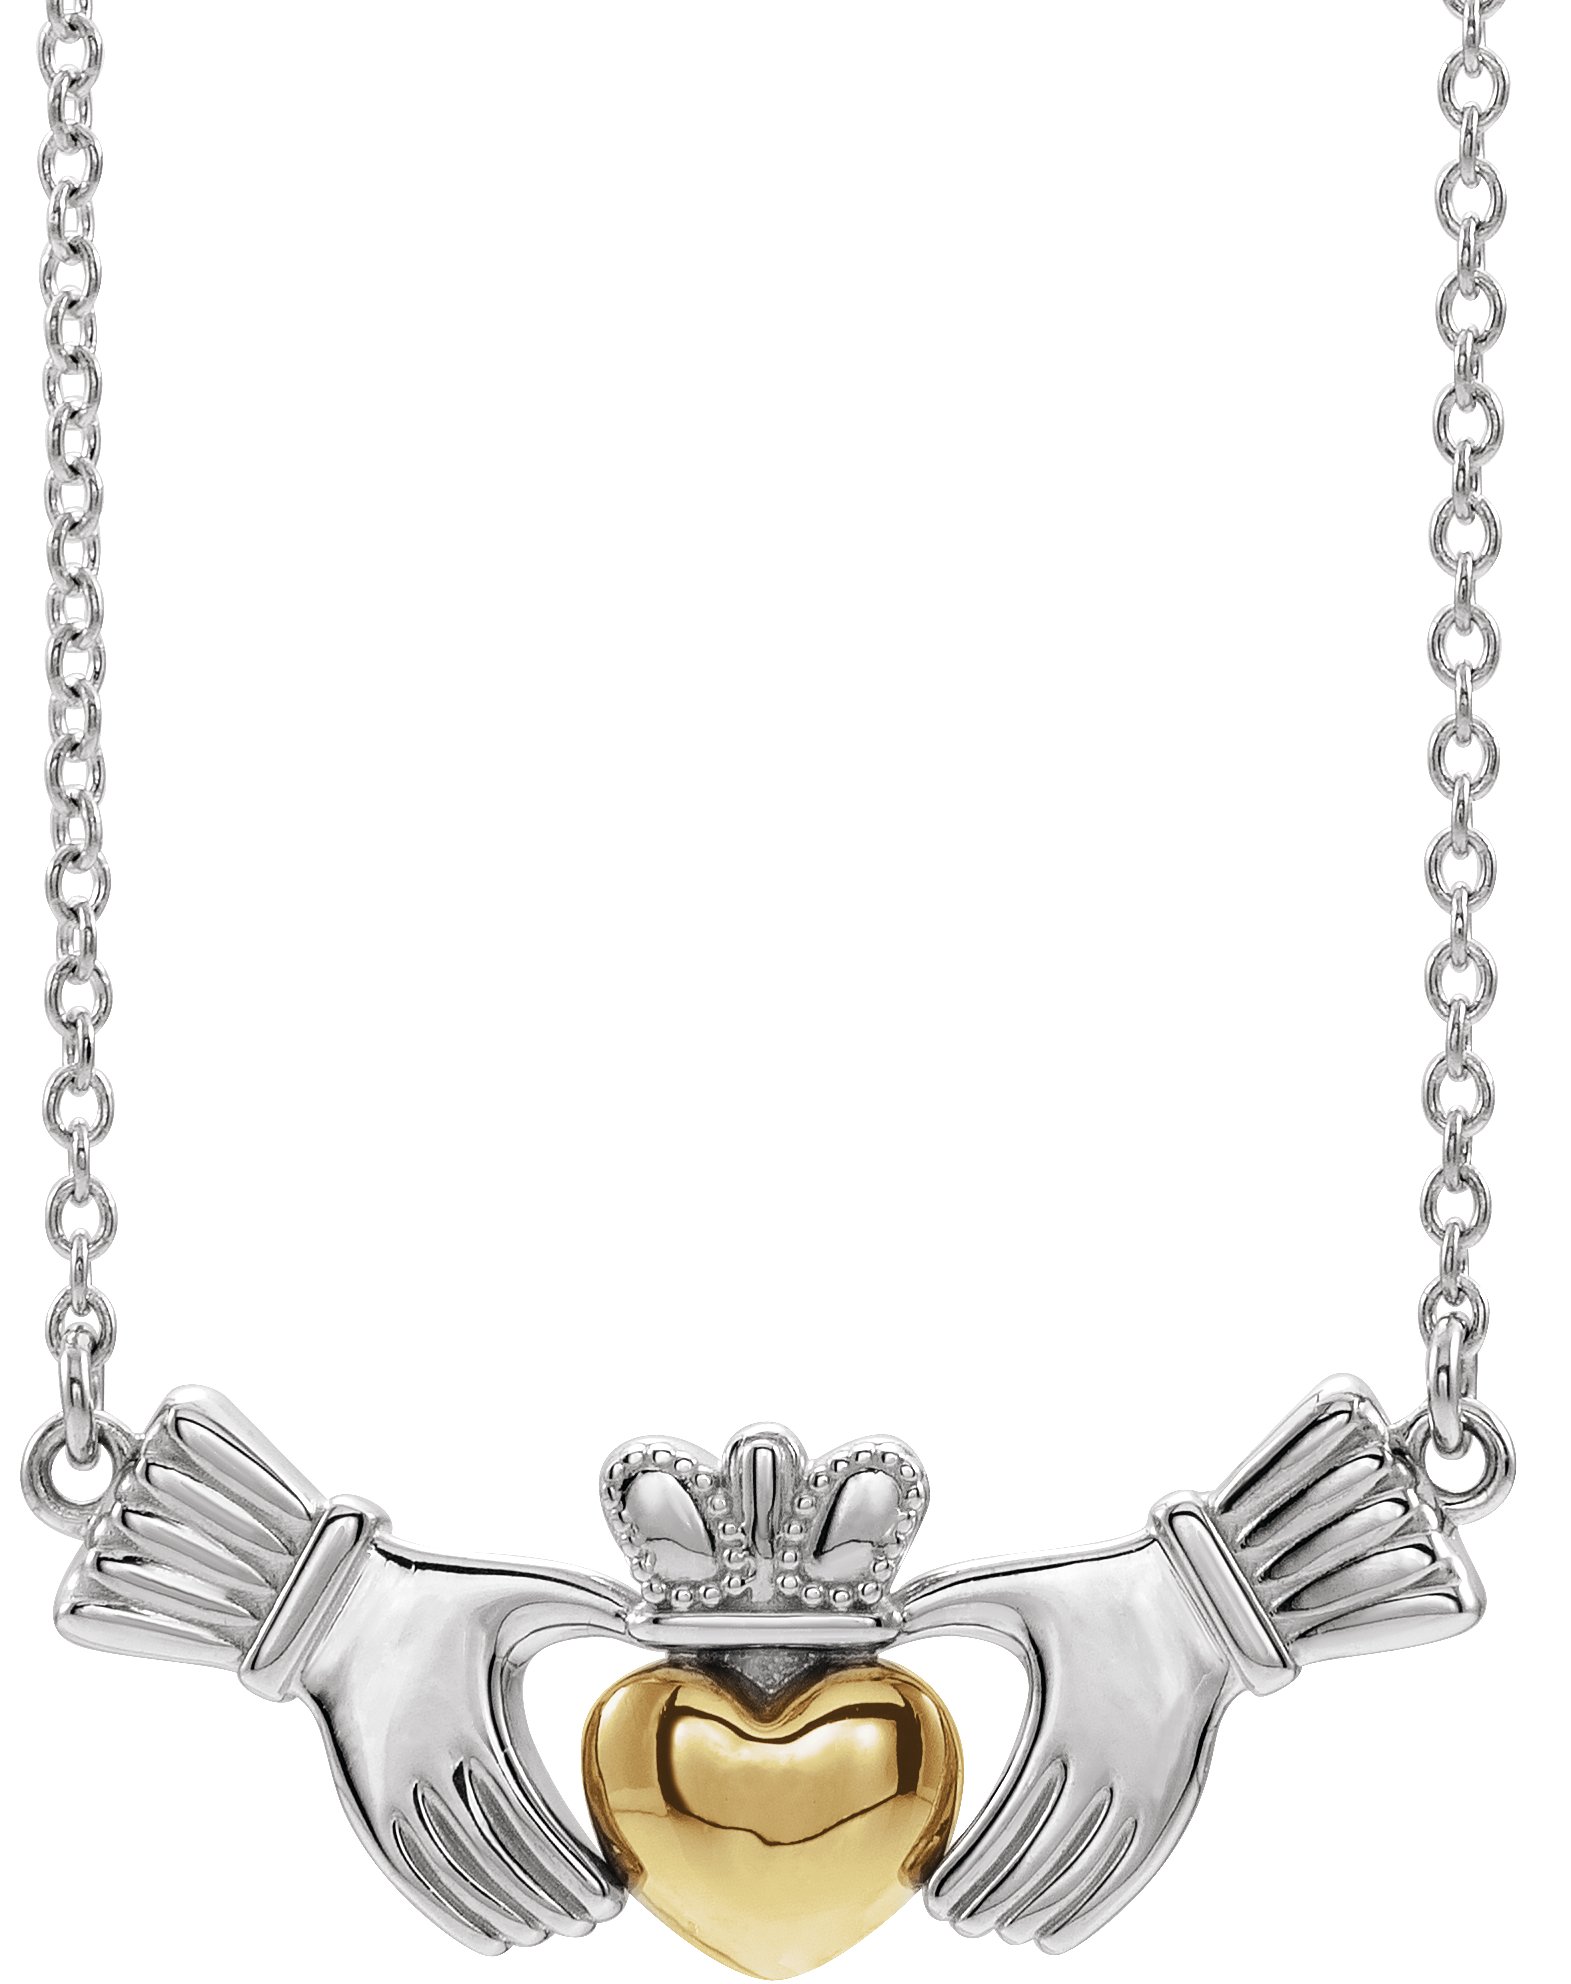 14K White and Yellow Claddagh 16 inch Necklace Ref. 16079168